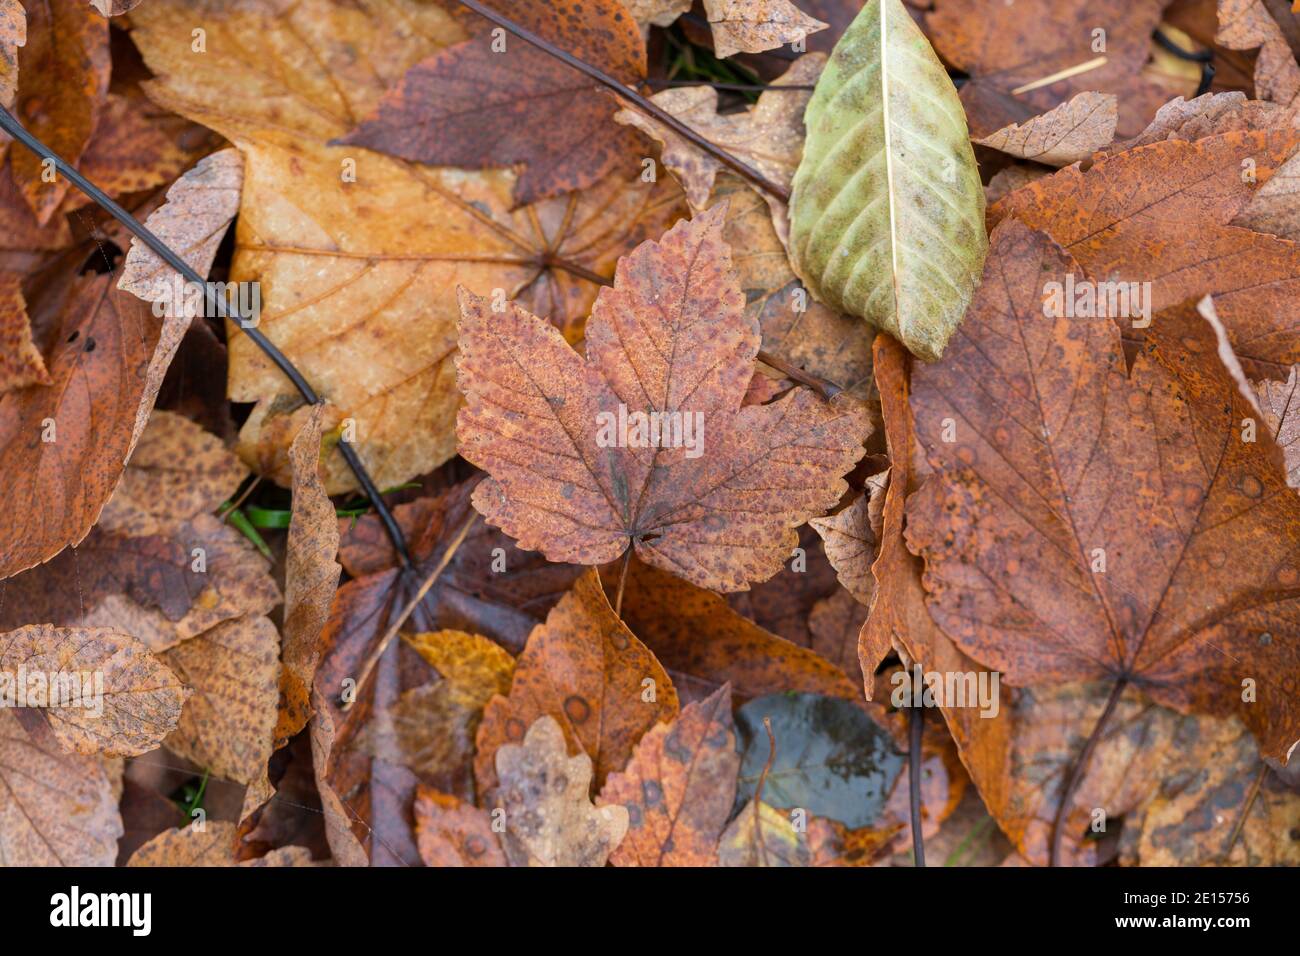 Brown leaves on the ground, a maple leave in the center. Top down view. Stock Photo